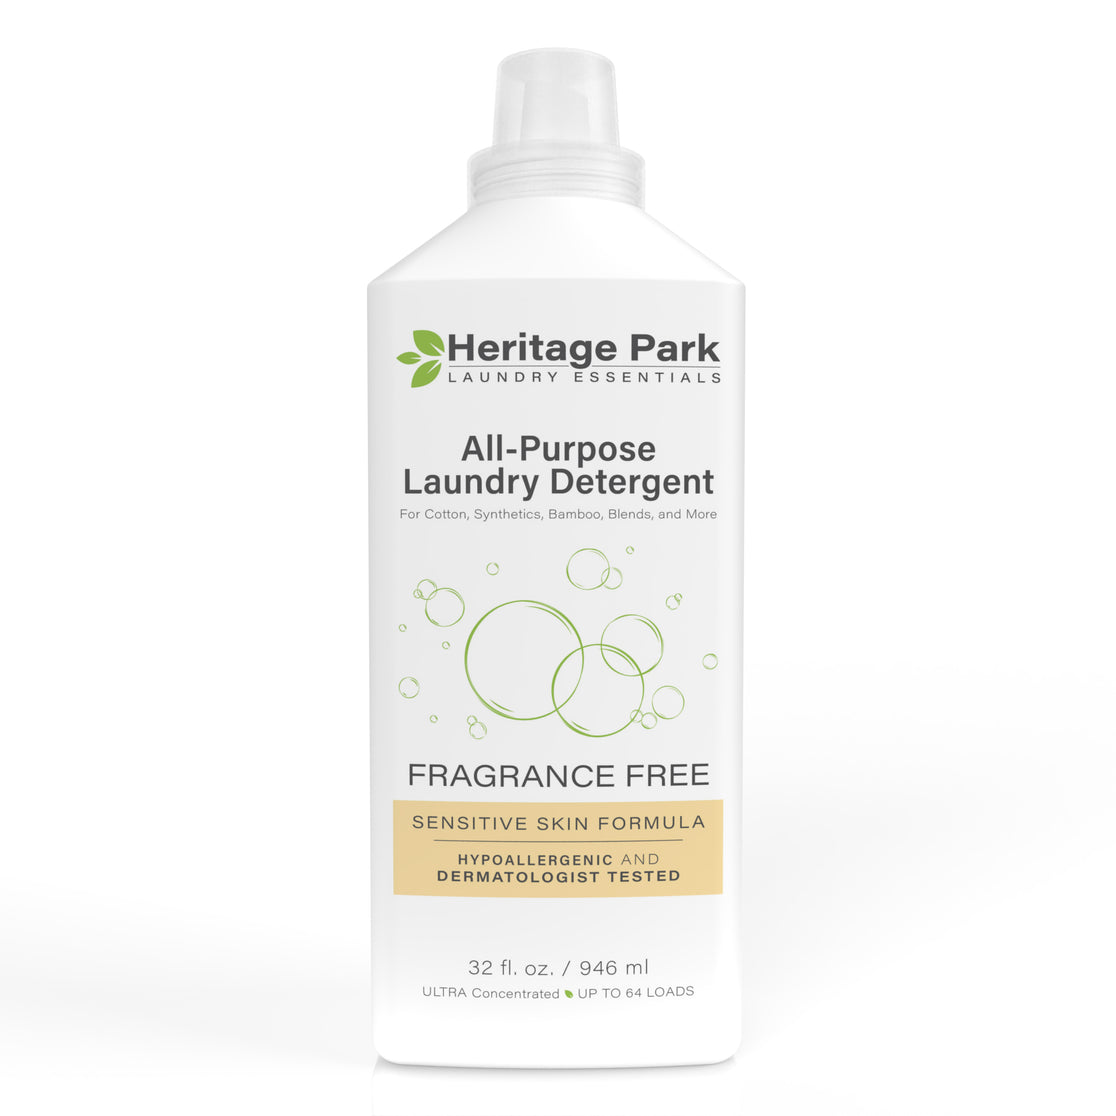 All About Hypoallergenic Laundry Detergent from Heritage Park Laundry -  Heritage Park Laundry Essentials